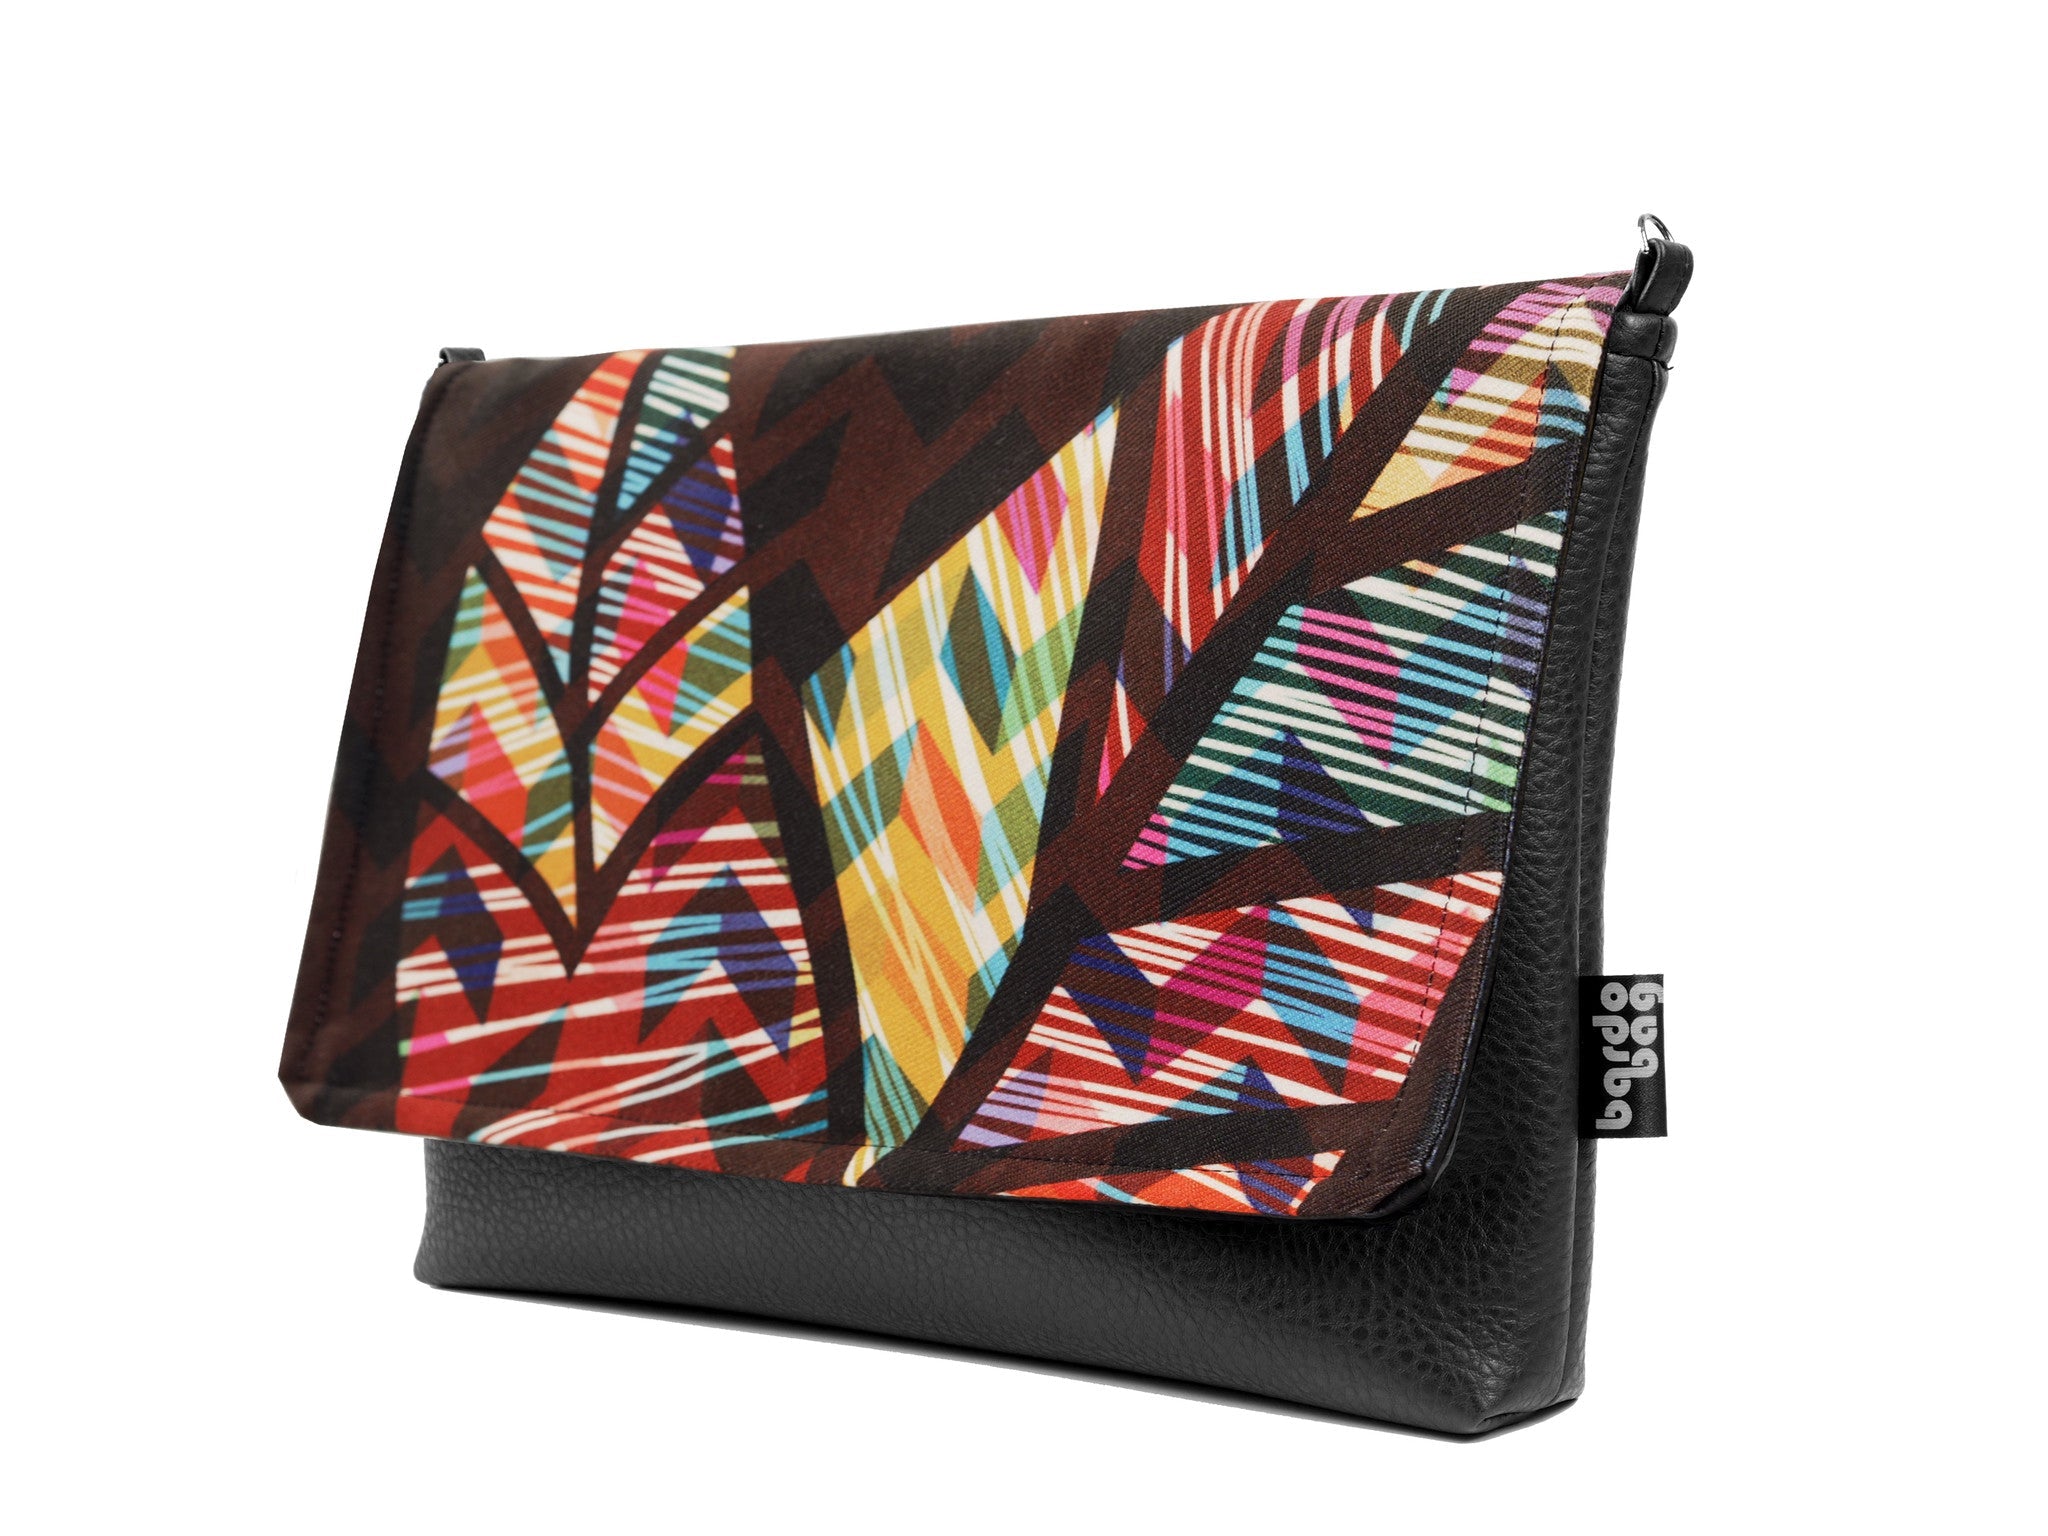 Bardo small bag - One whole - Premium Bardo small bag from BARDO ART WORKS - Just lvabstract, Art Print, black, blue, floral, gift, handemade, leaves, nature, orange, painted patterns, purple, red, urban style, vegan leather, woman, yellow59! Shop now at BARDO ART WORKS